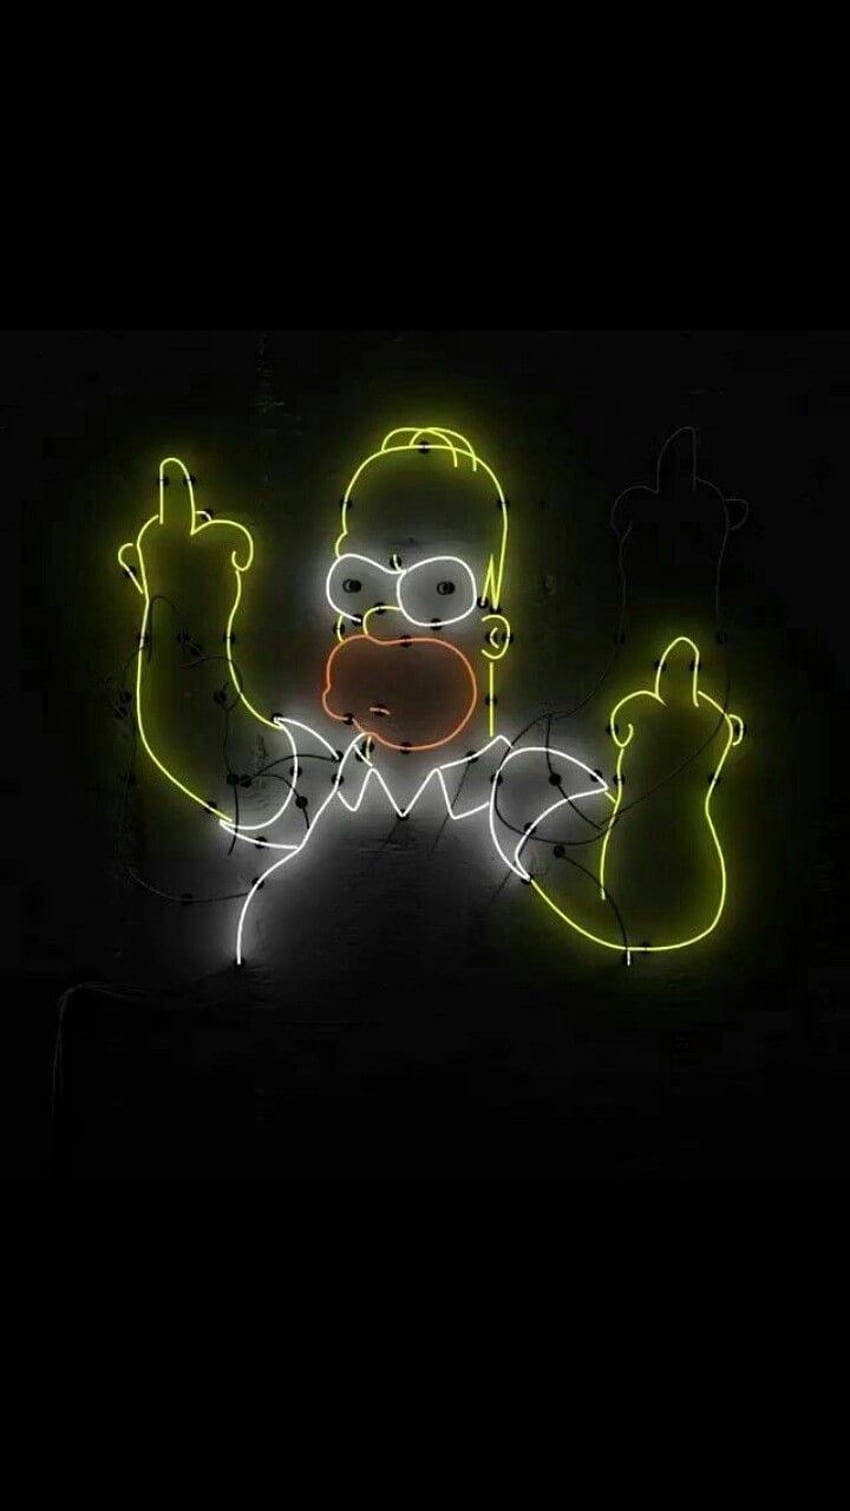 "Homer Simpson's own version of "the thinker" Wallpaper